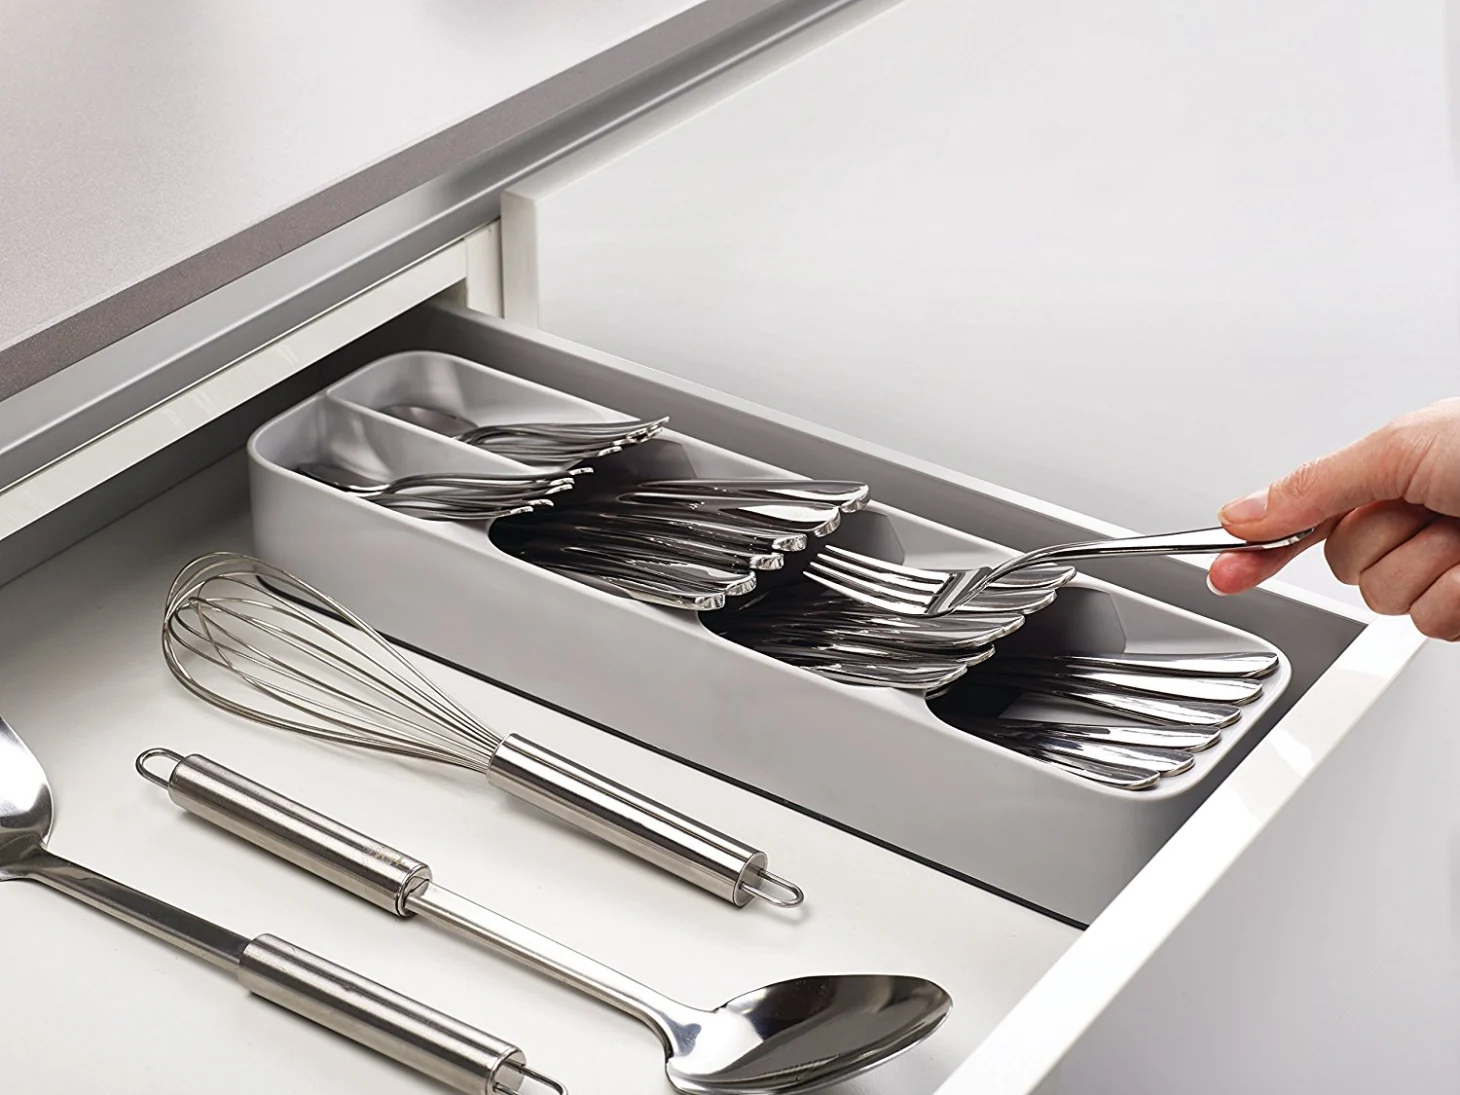 Top-rated Kitchen Organizers On Amazon That Pros Always Buy